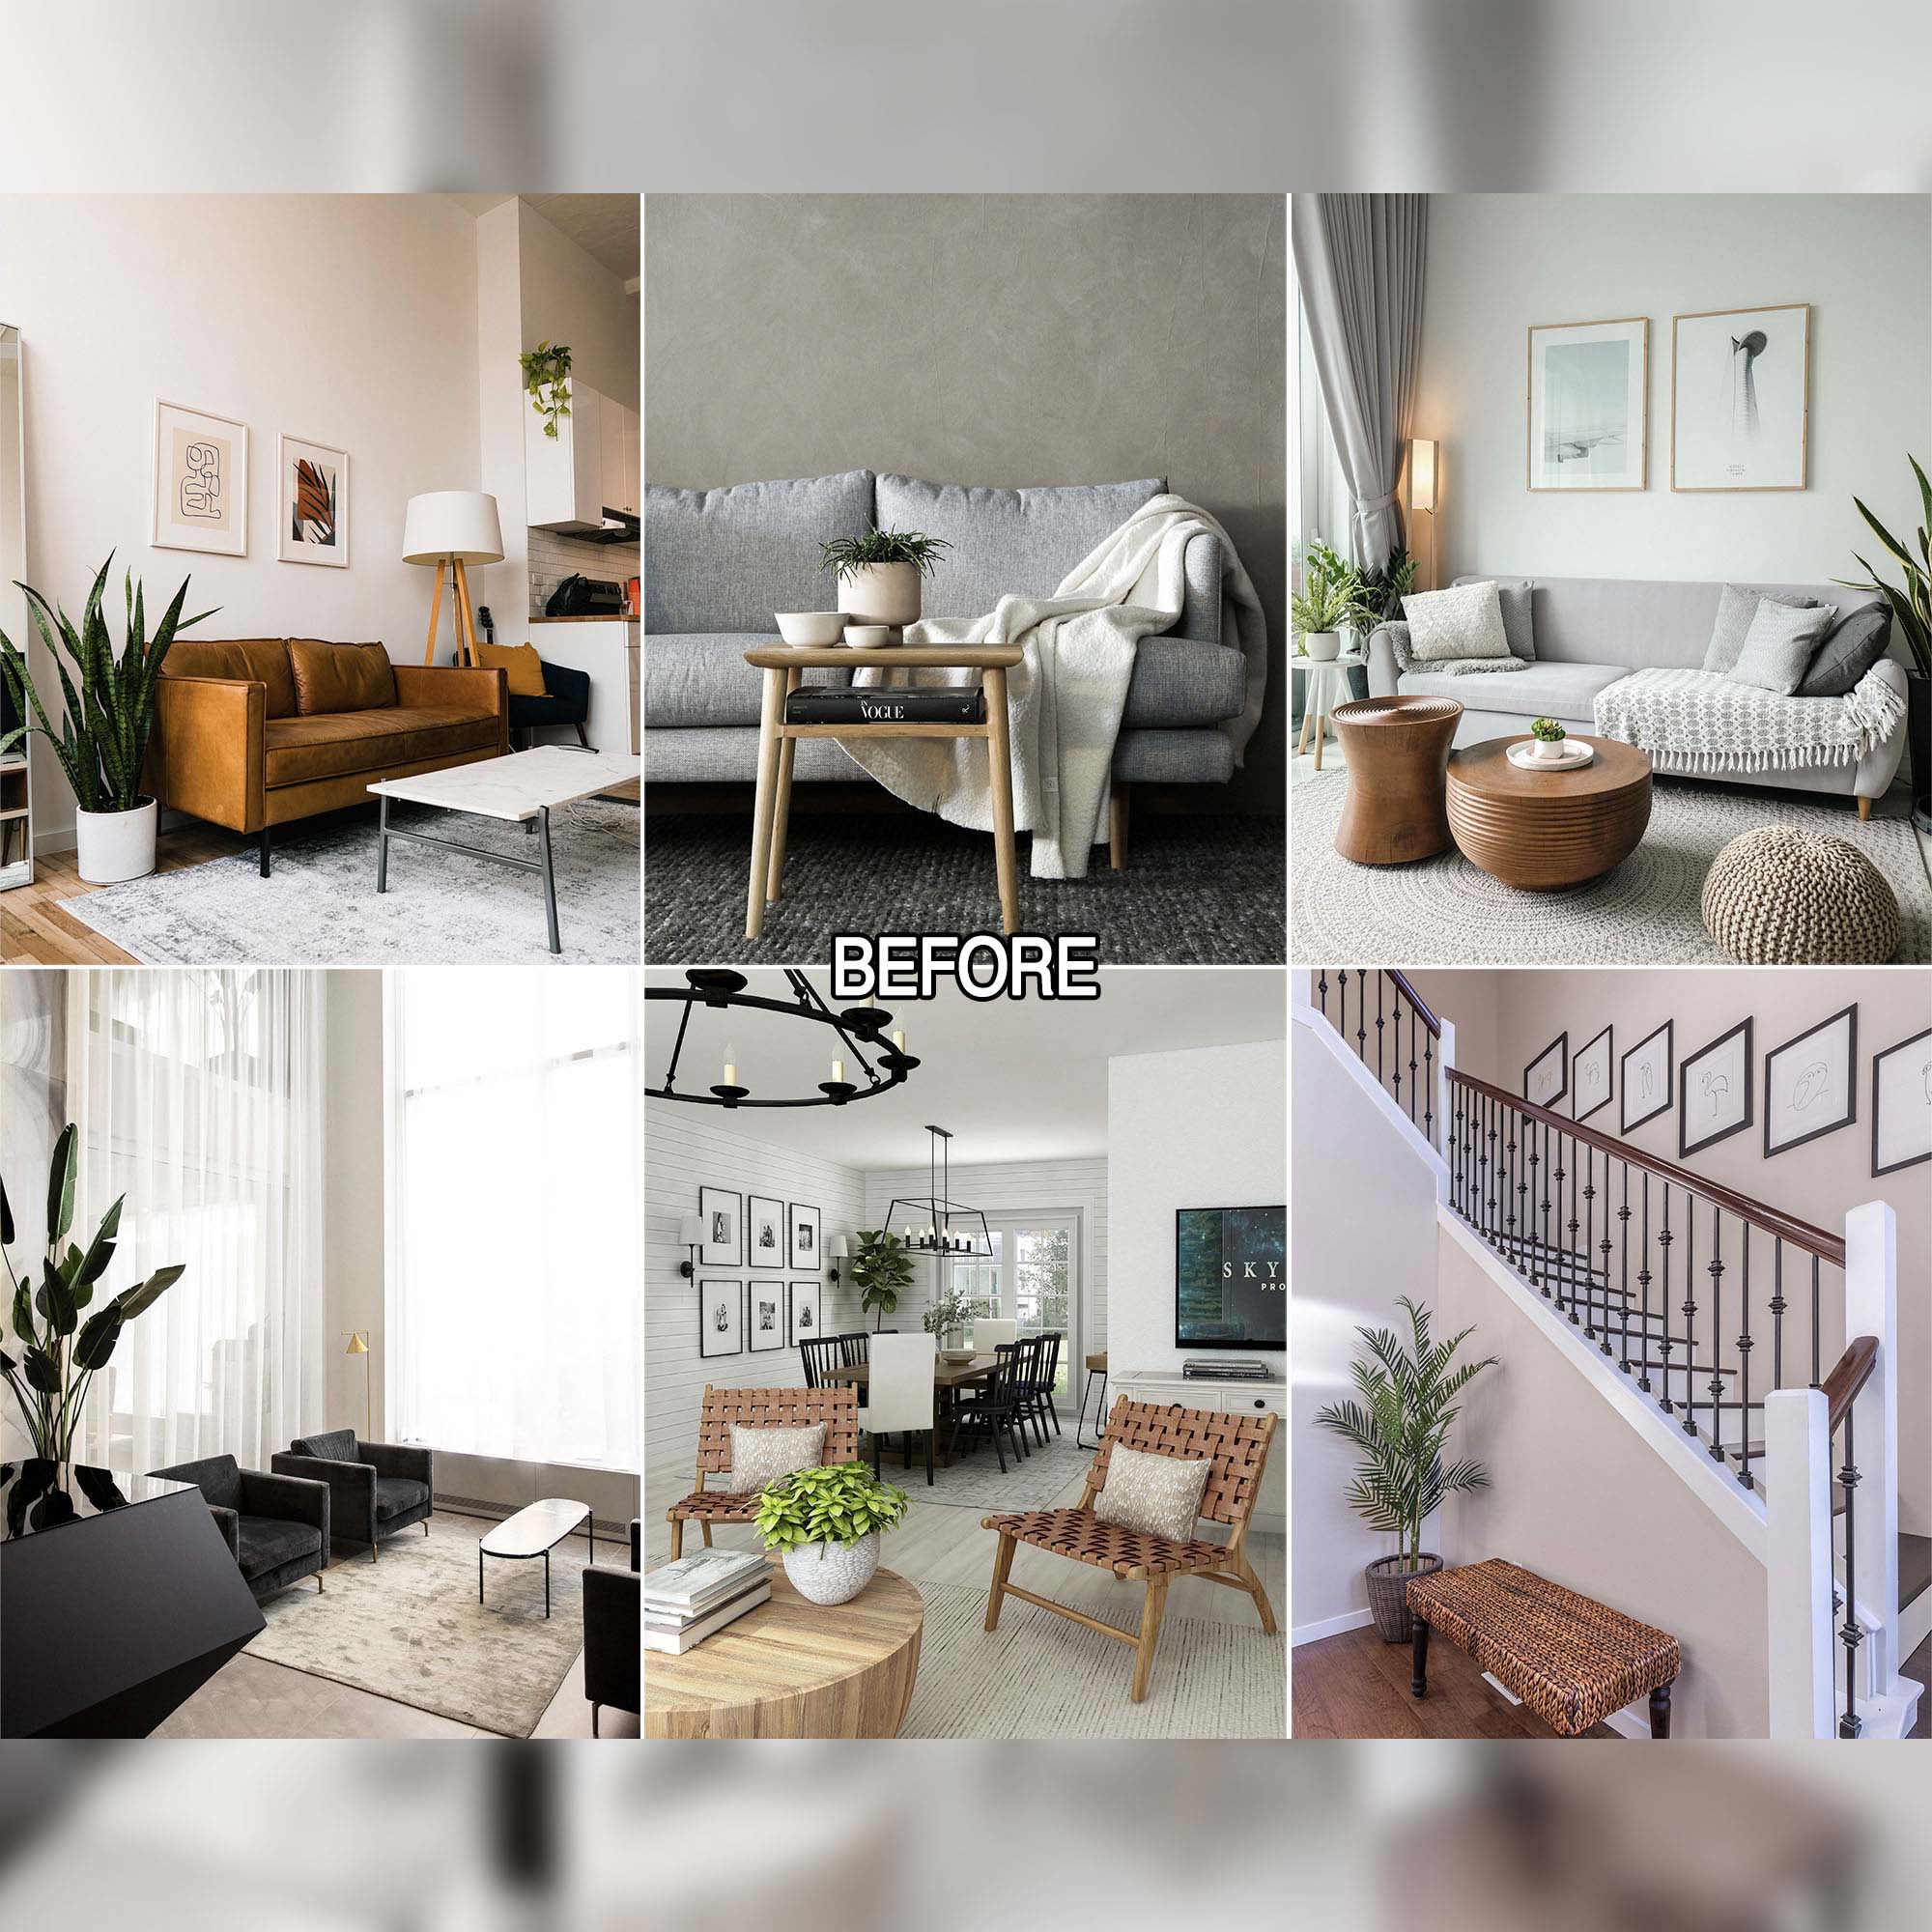 Collection of gorgeous interior images